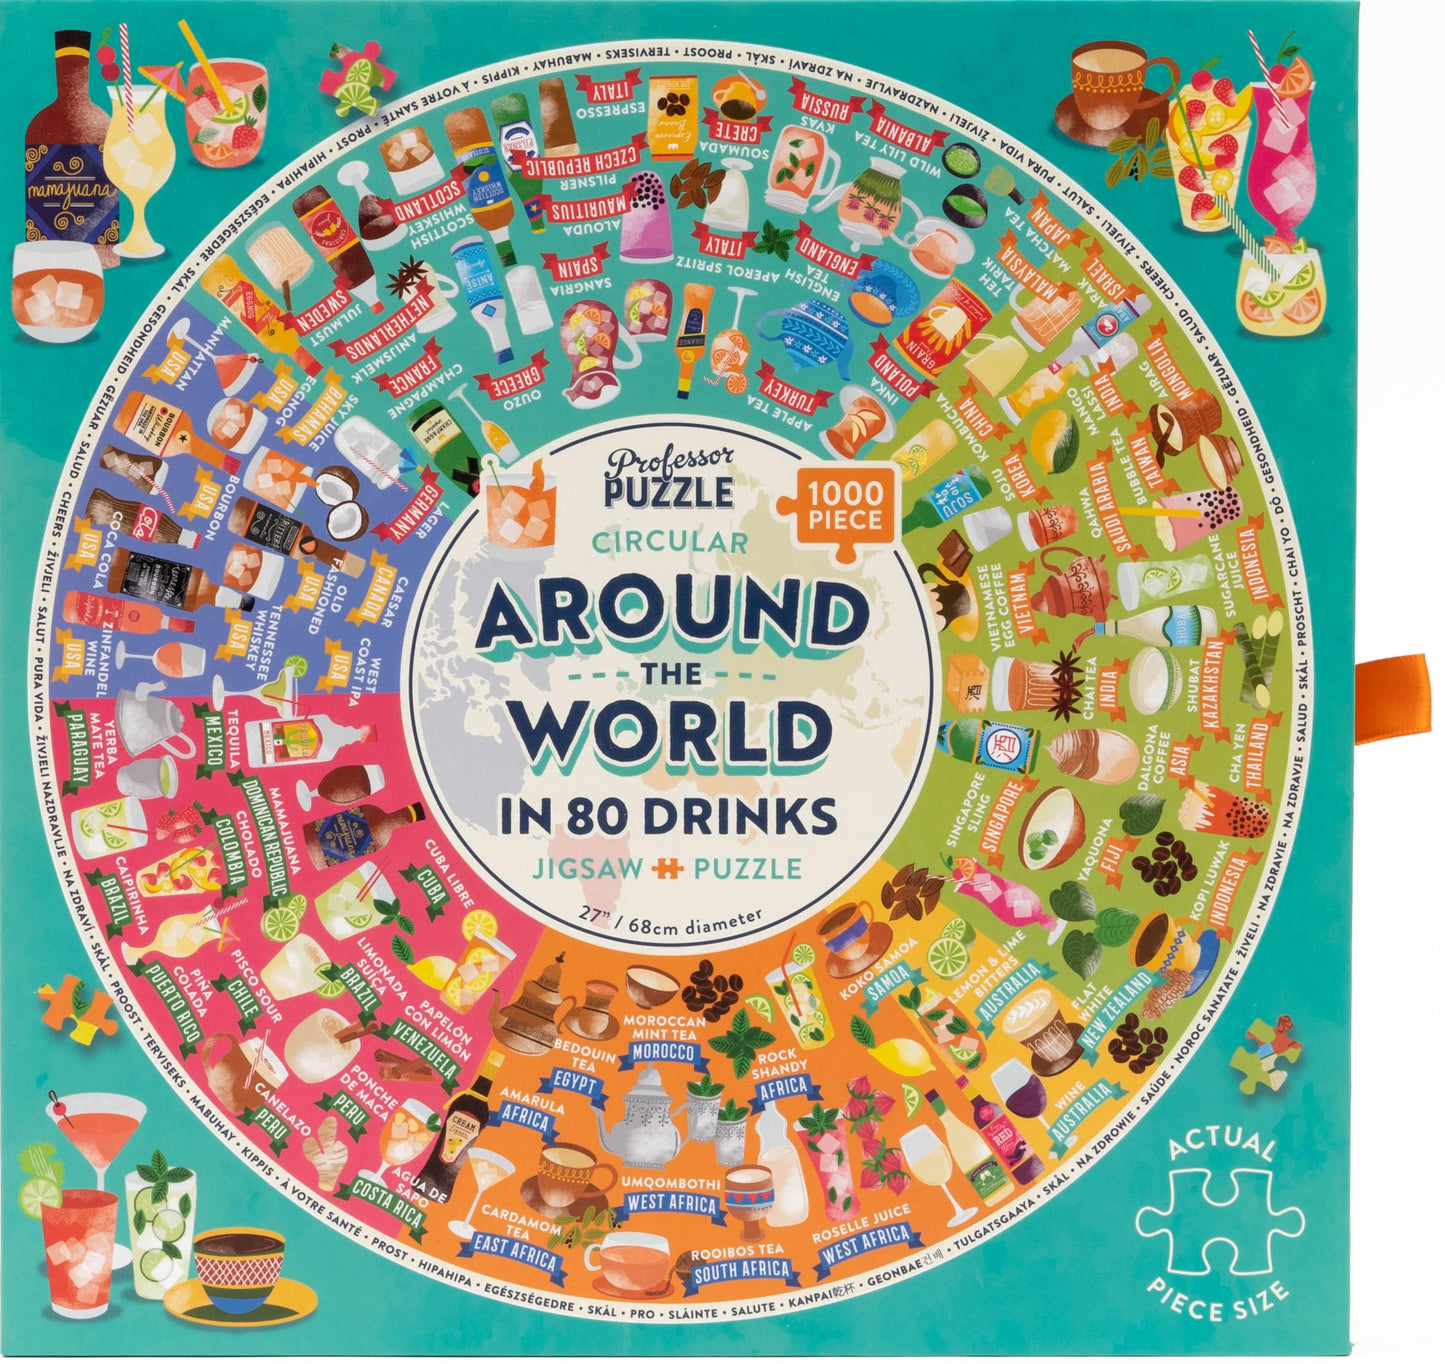 Professor Puzzle - Around the World in 80 Drinks - 1000 Piece Jigsaw Puzzle